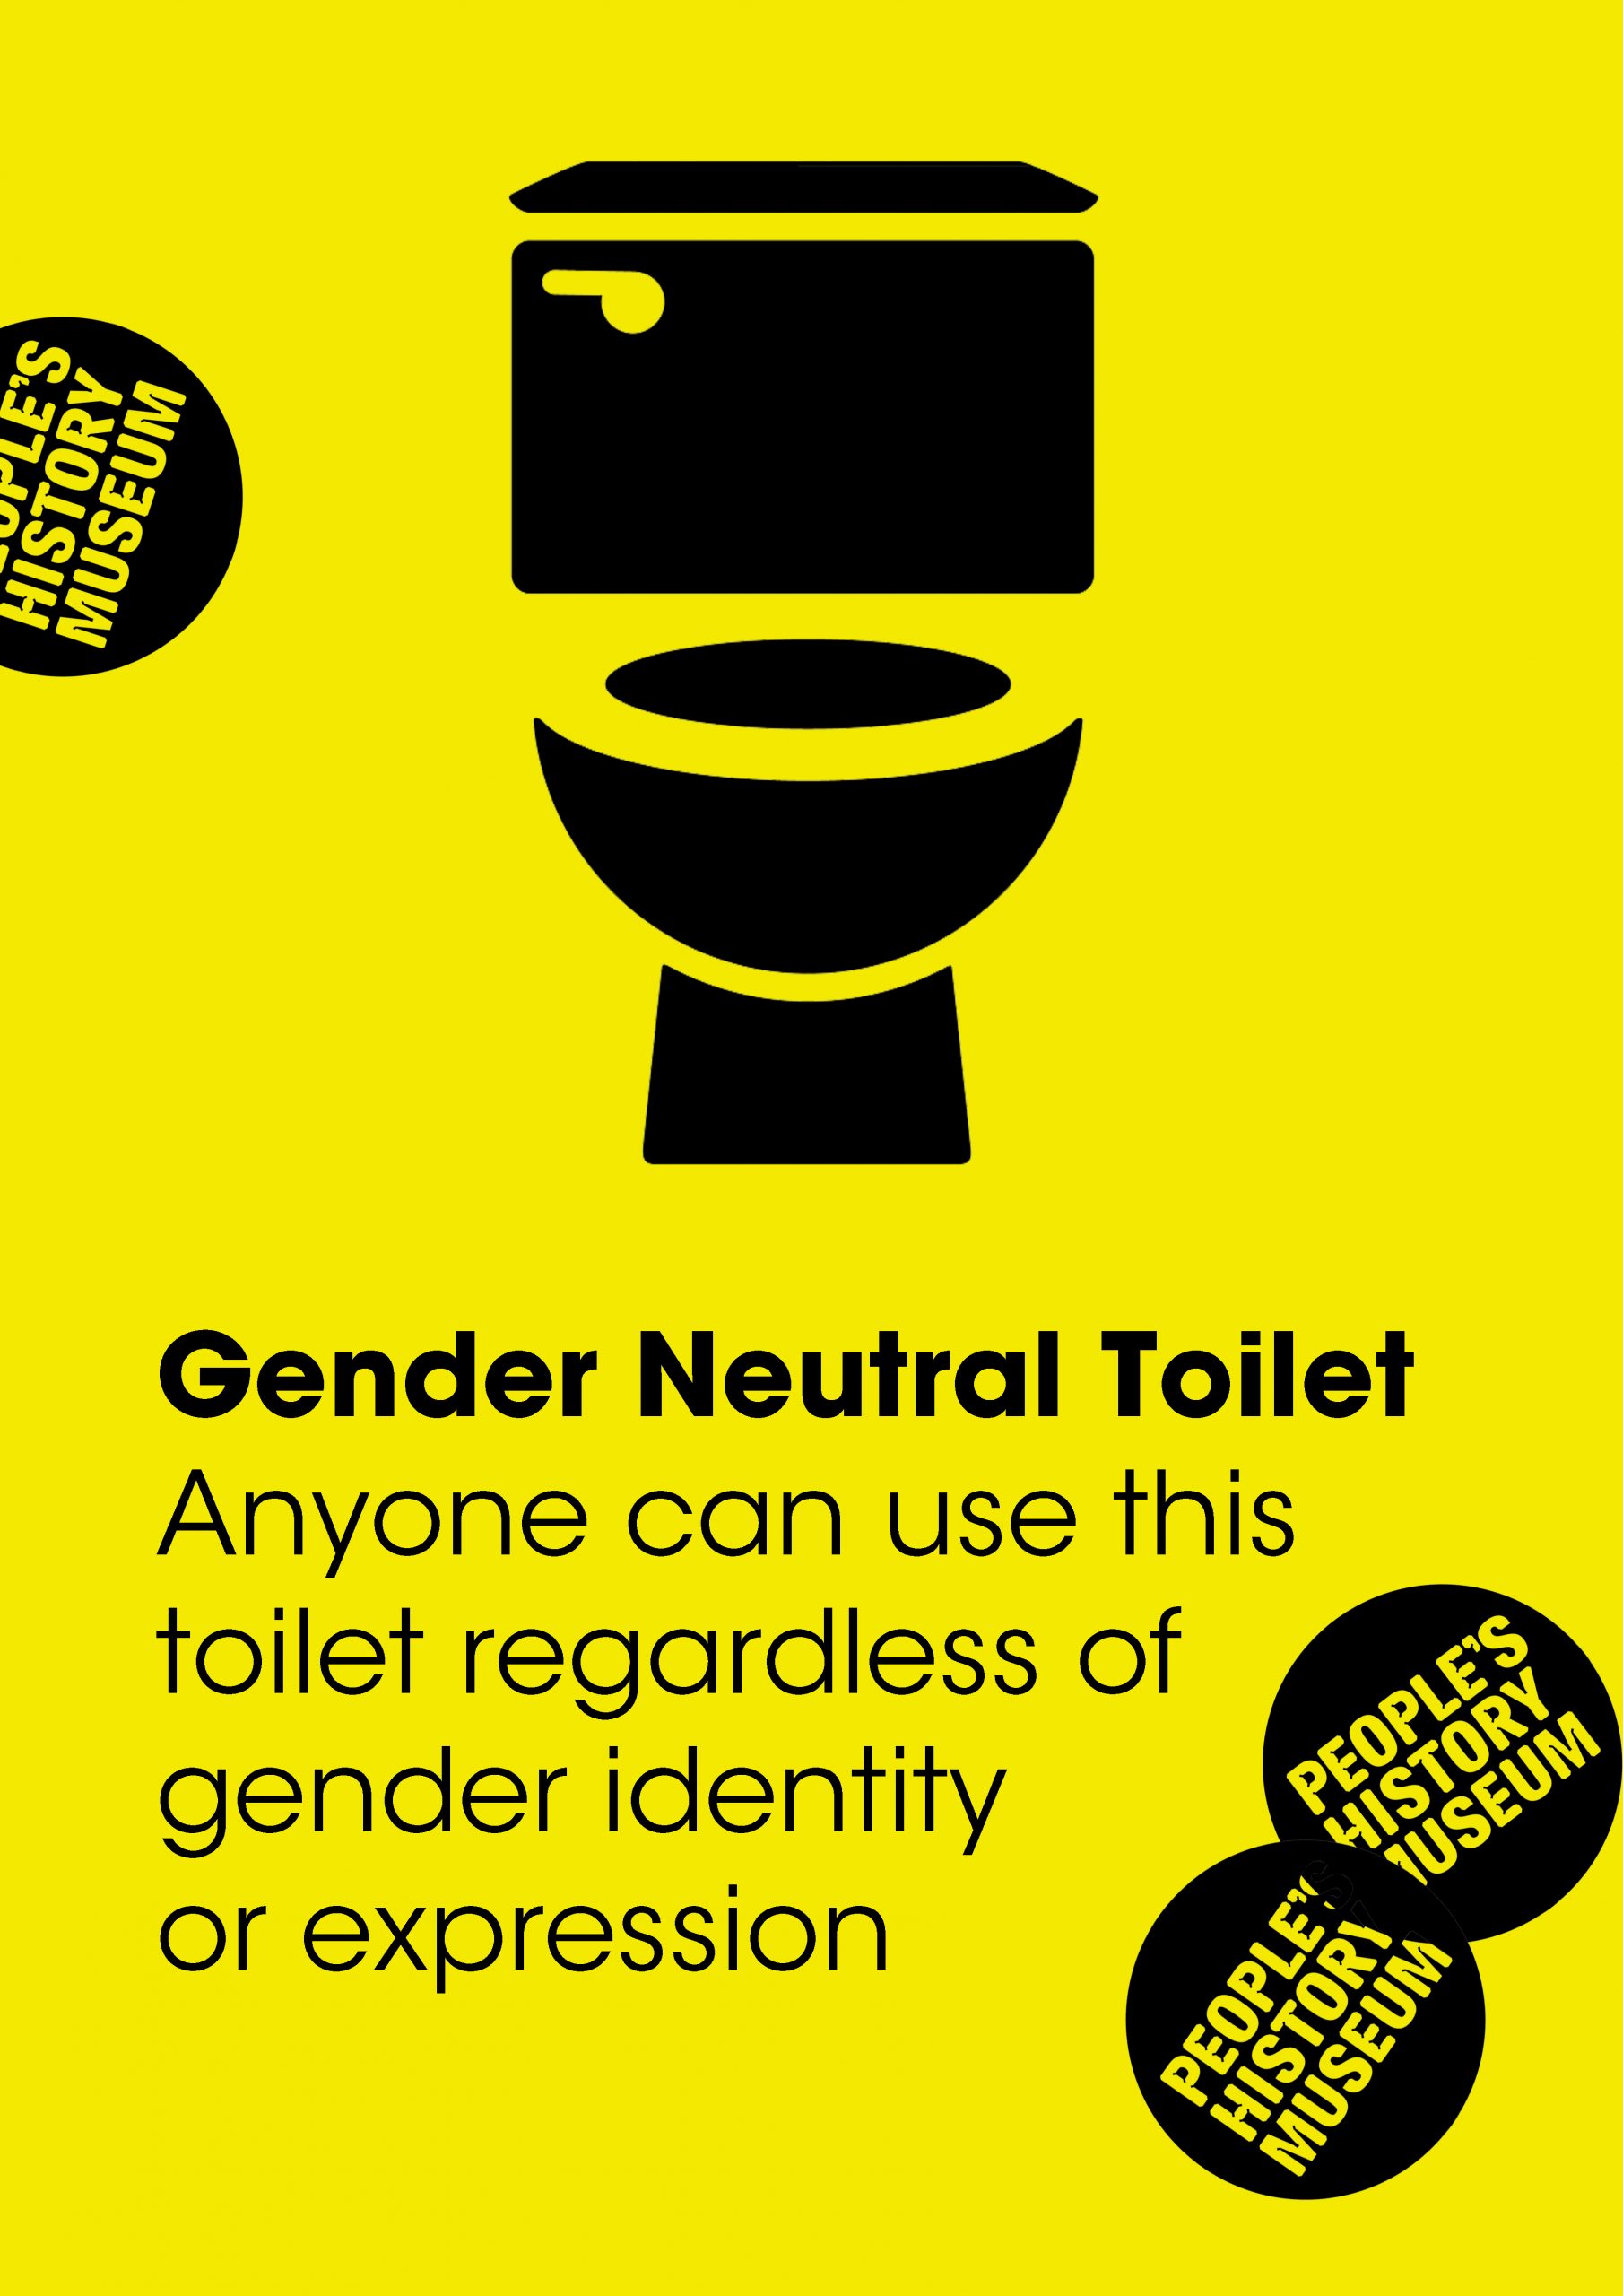 Gender neutral toilet sign with text 'Anyone can use this toilet regardless of gender identity or expression'.